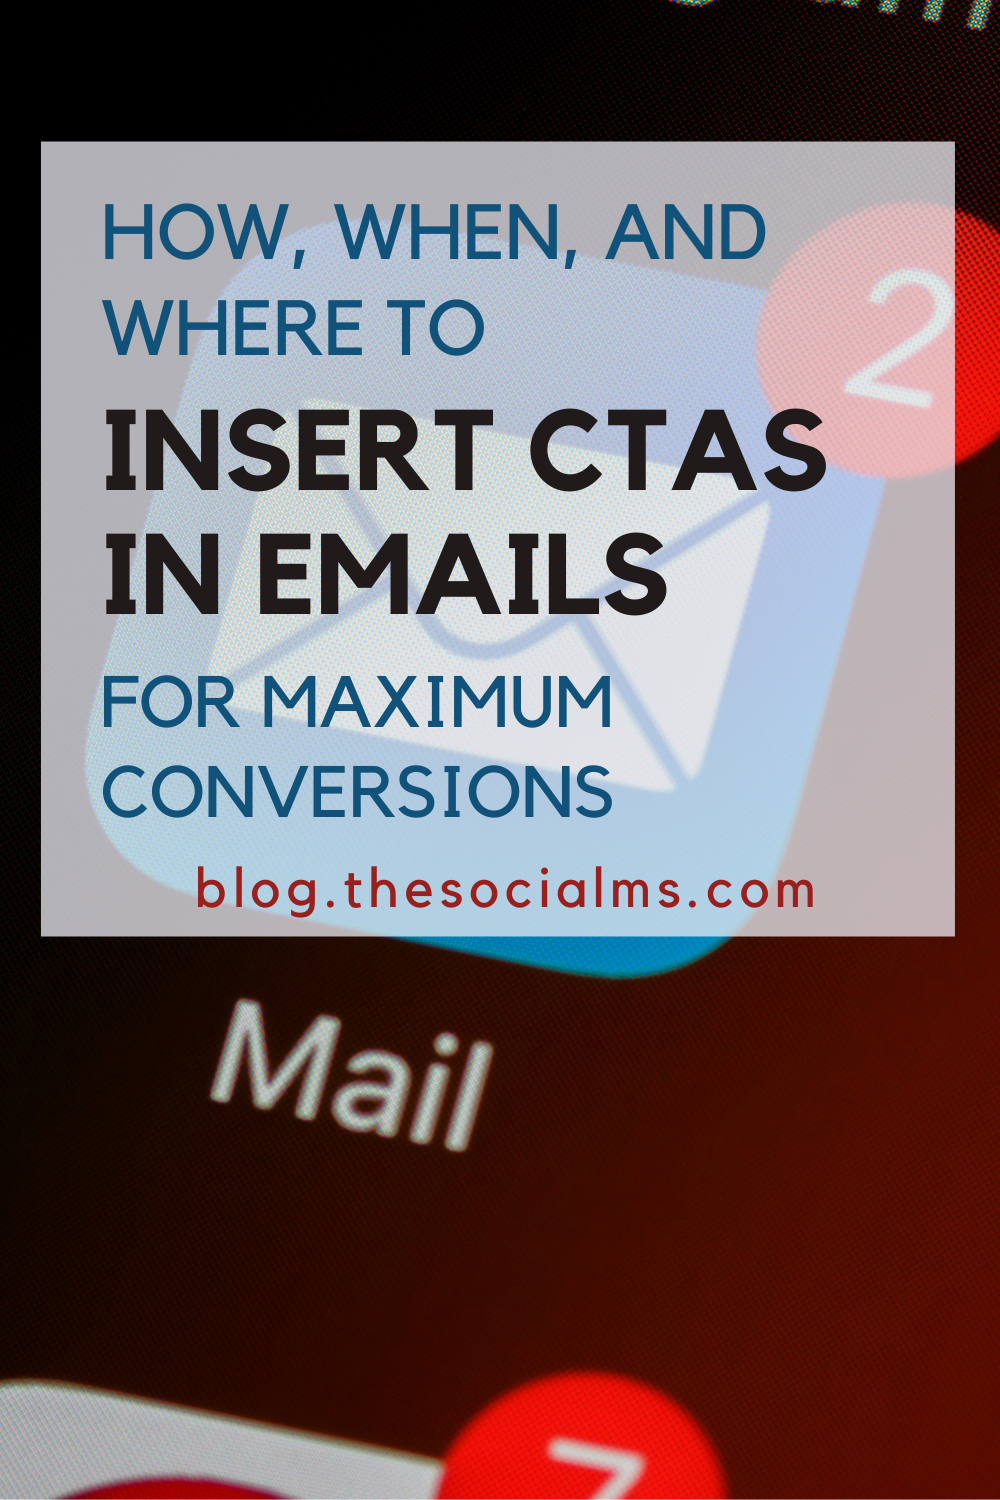 How to achieve your goals with email marketing campaigns through one button. What you need to know about the Call To Action (CTA) in your email campaigns to maximize your conversions. #emailmarketing #cta #calltoaction.